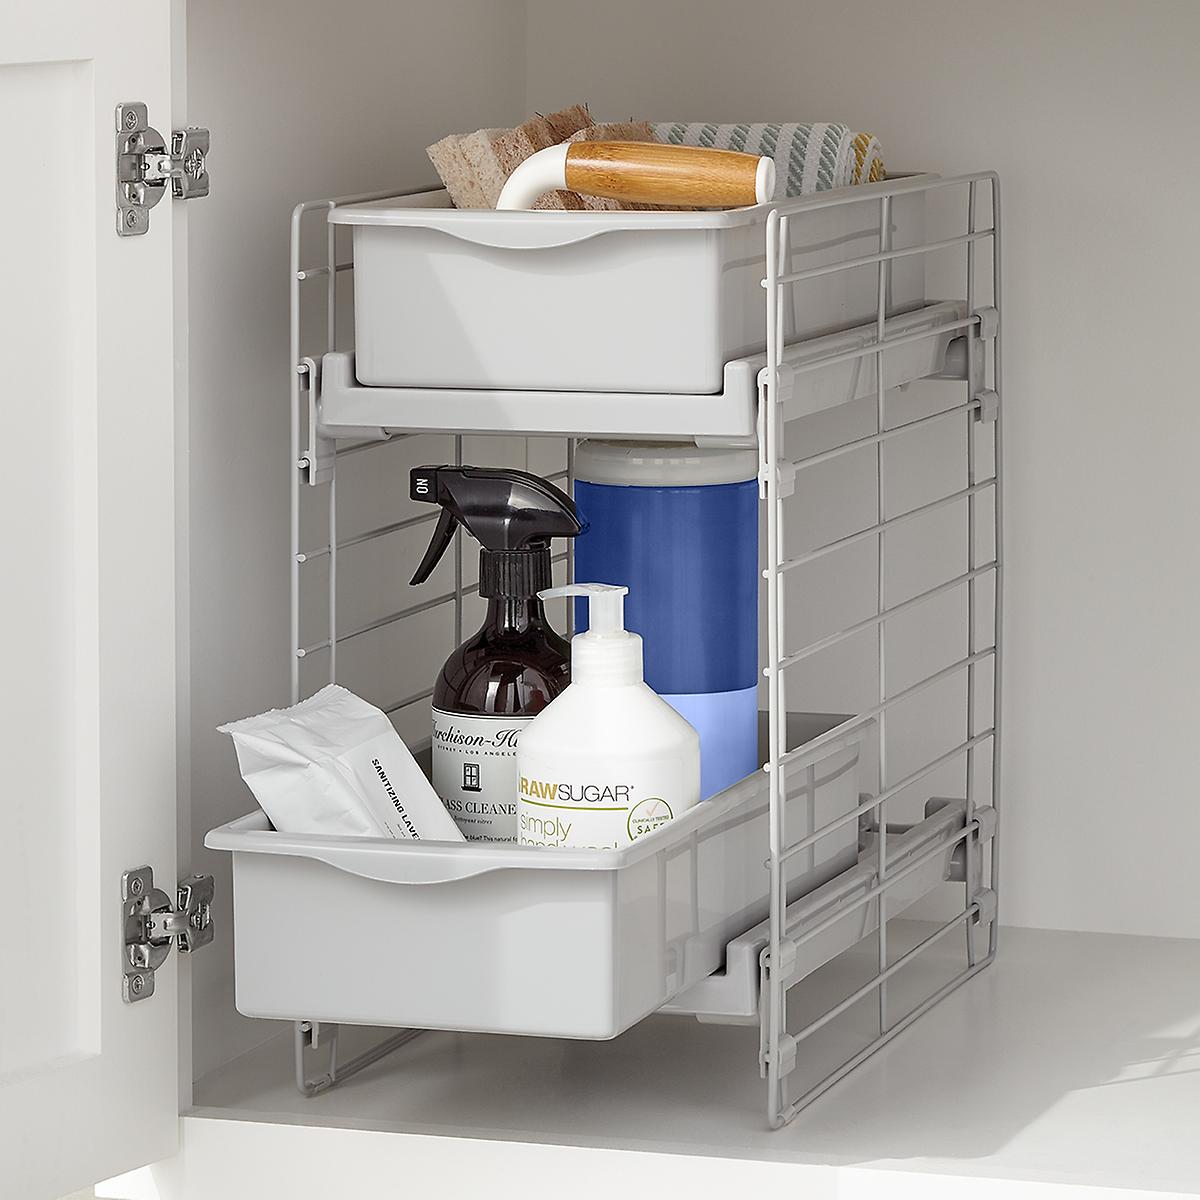 Sliding 20 Drawer Organizer   The Container Store